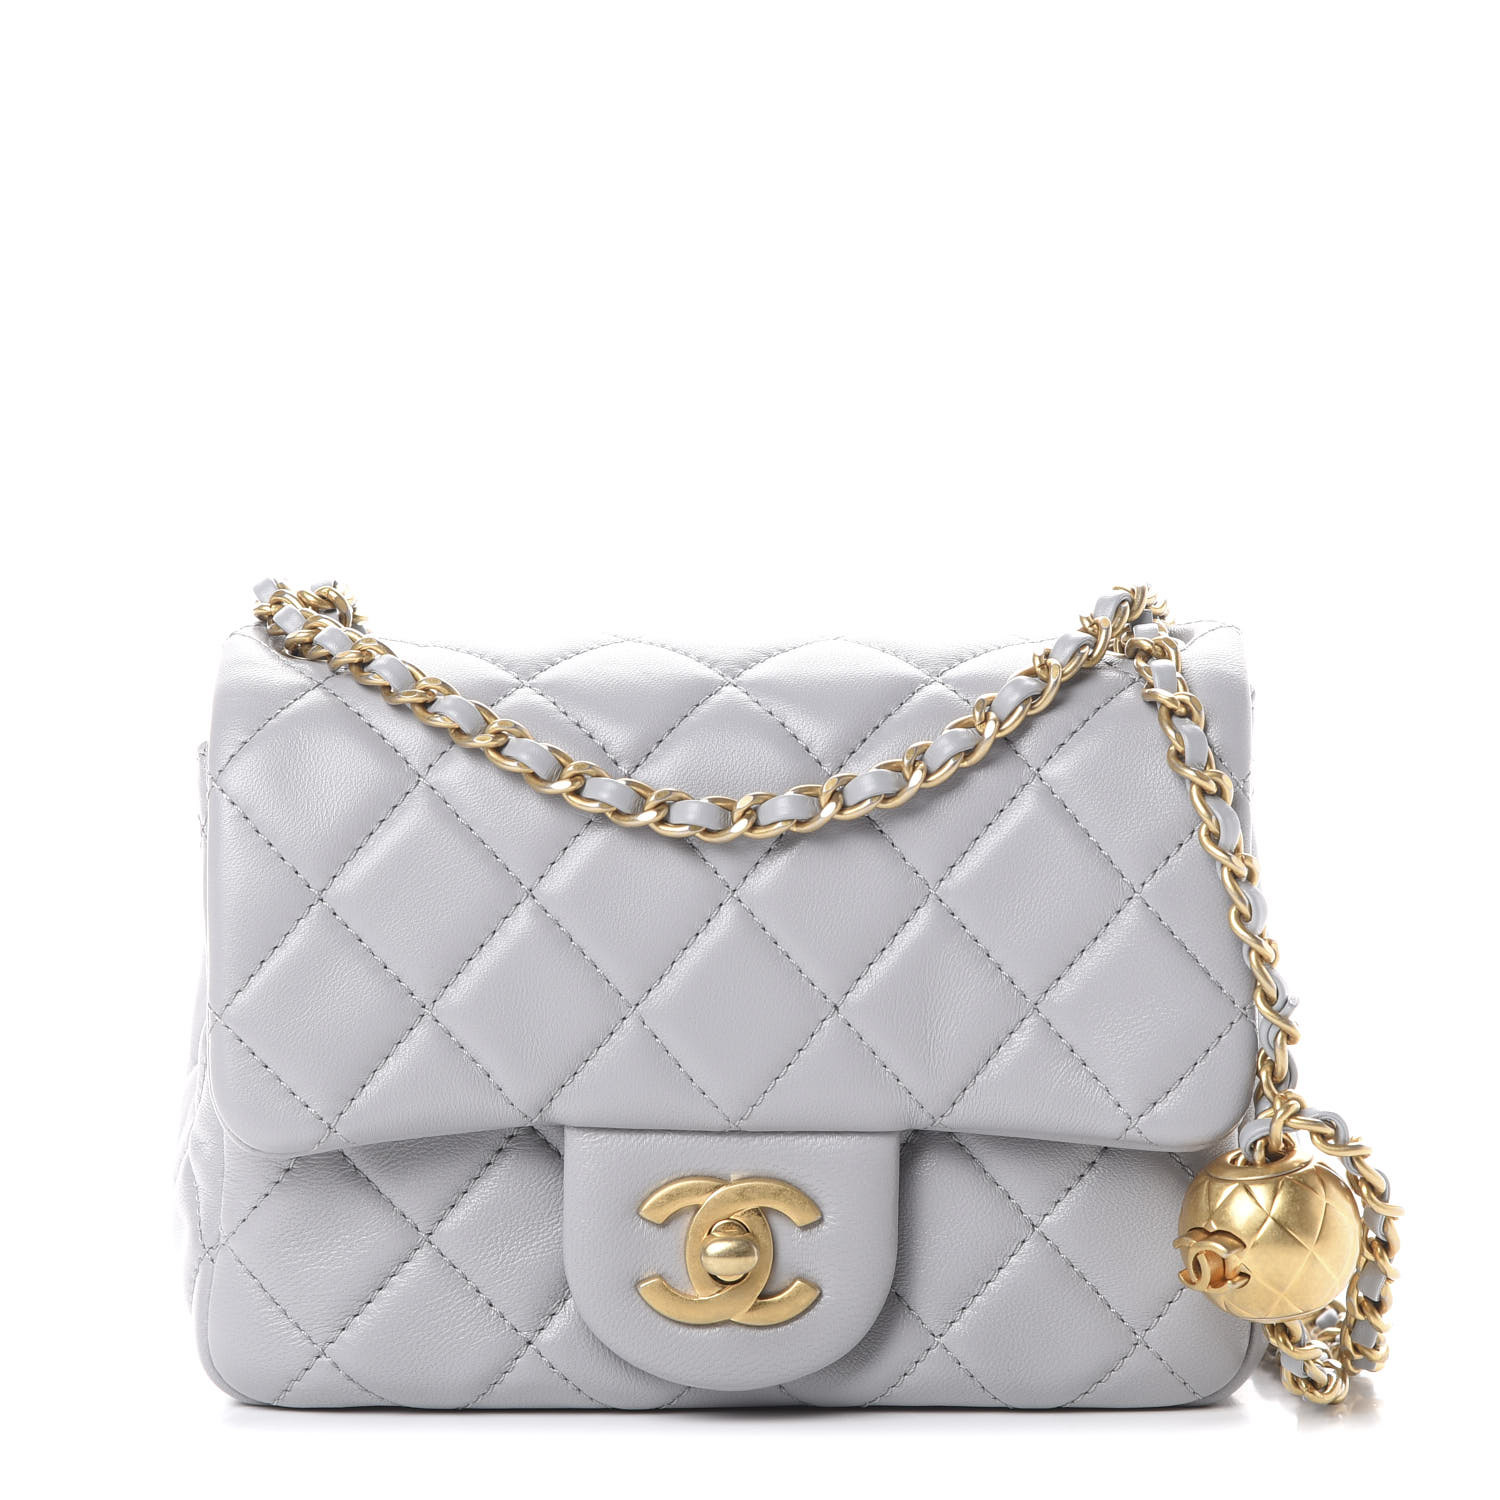 REVEAL: CHANEL 20S Square Mini Flap Bag with Adjustable Gold Ball Chain, SLGs